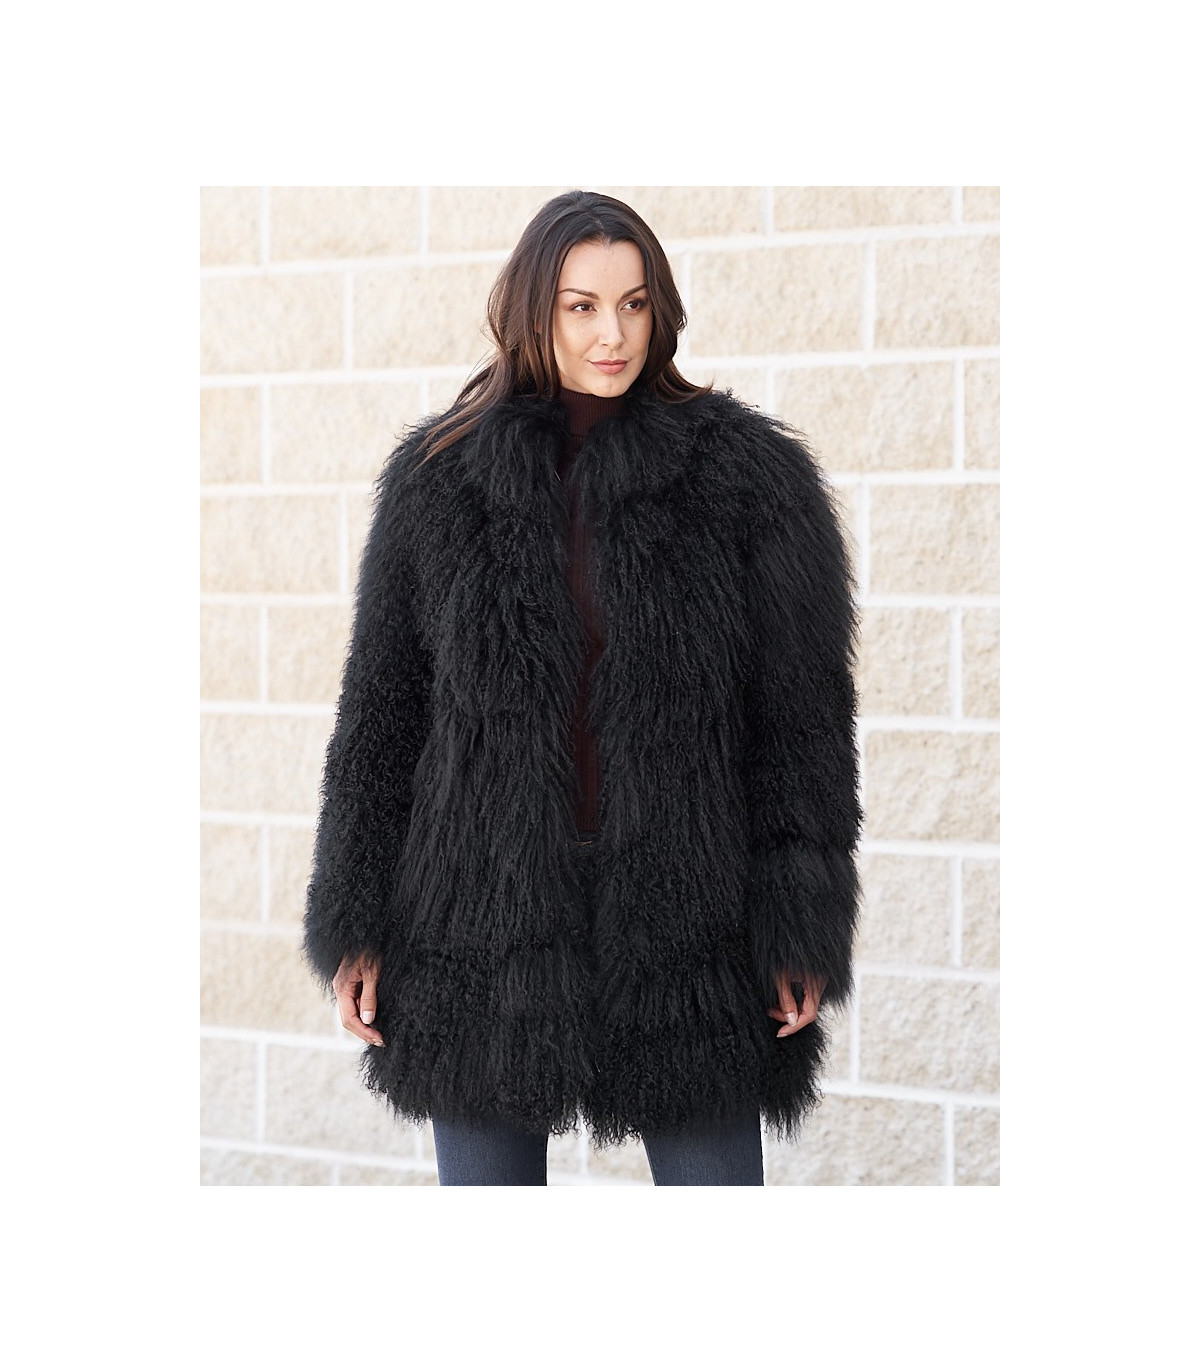 Beautifully handcrafted from 100% real extra soft and curly Tibetan / Mongolian  lamb fur.